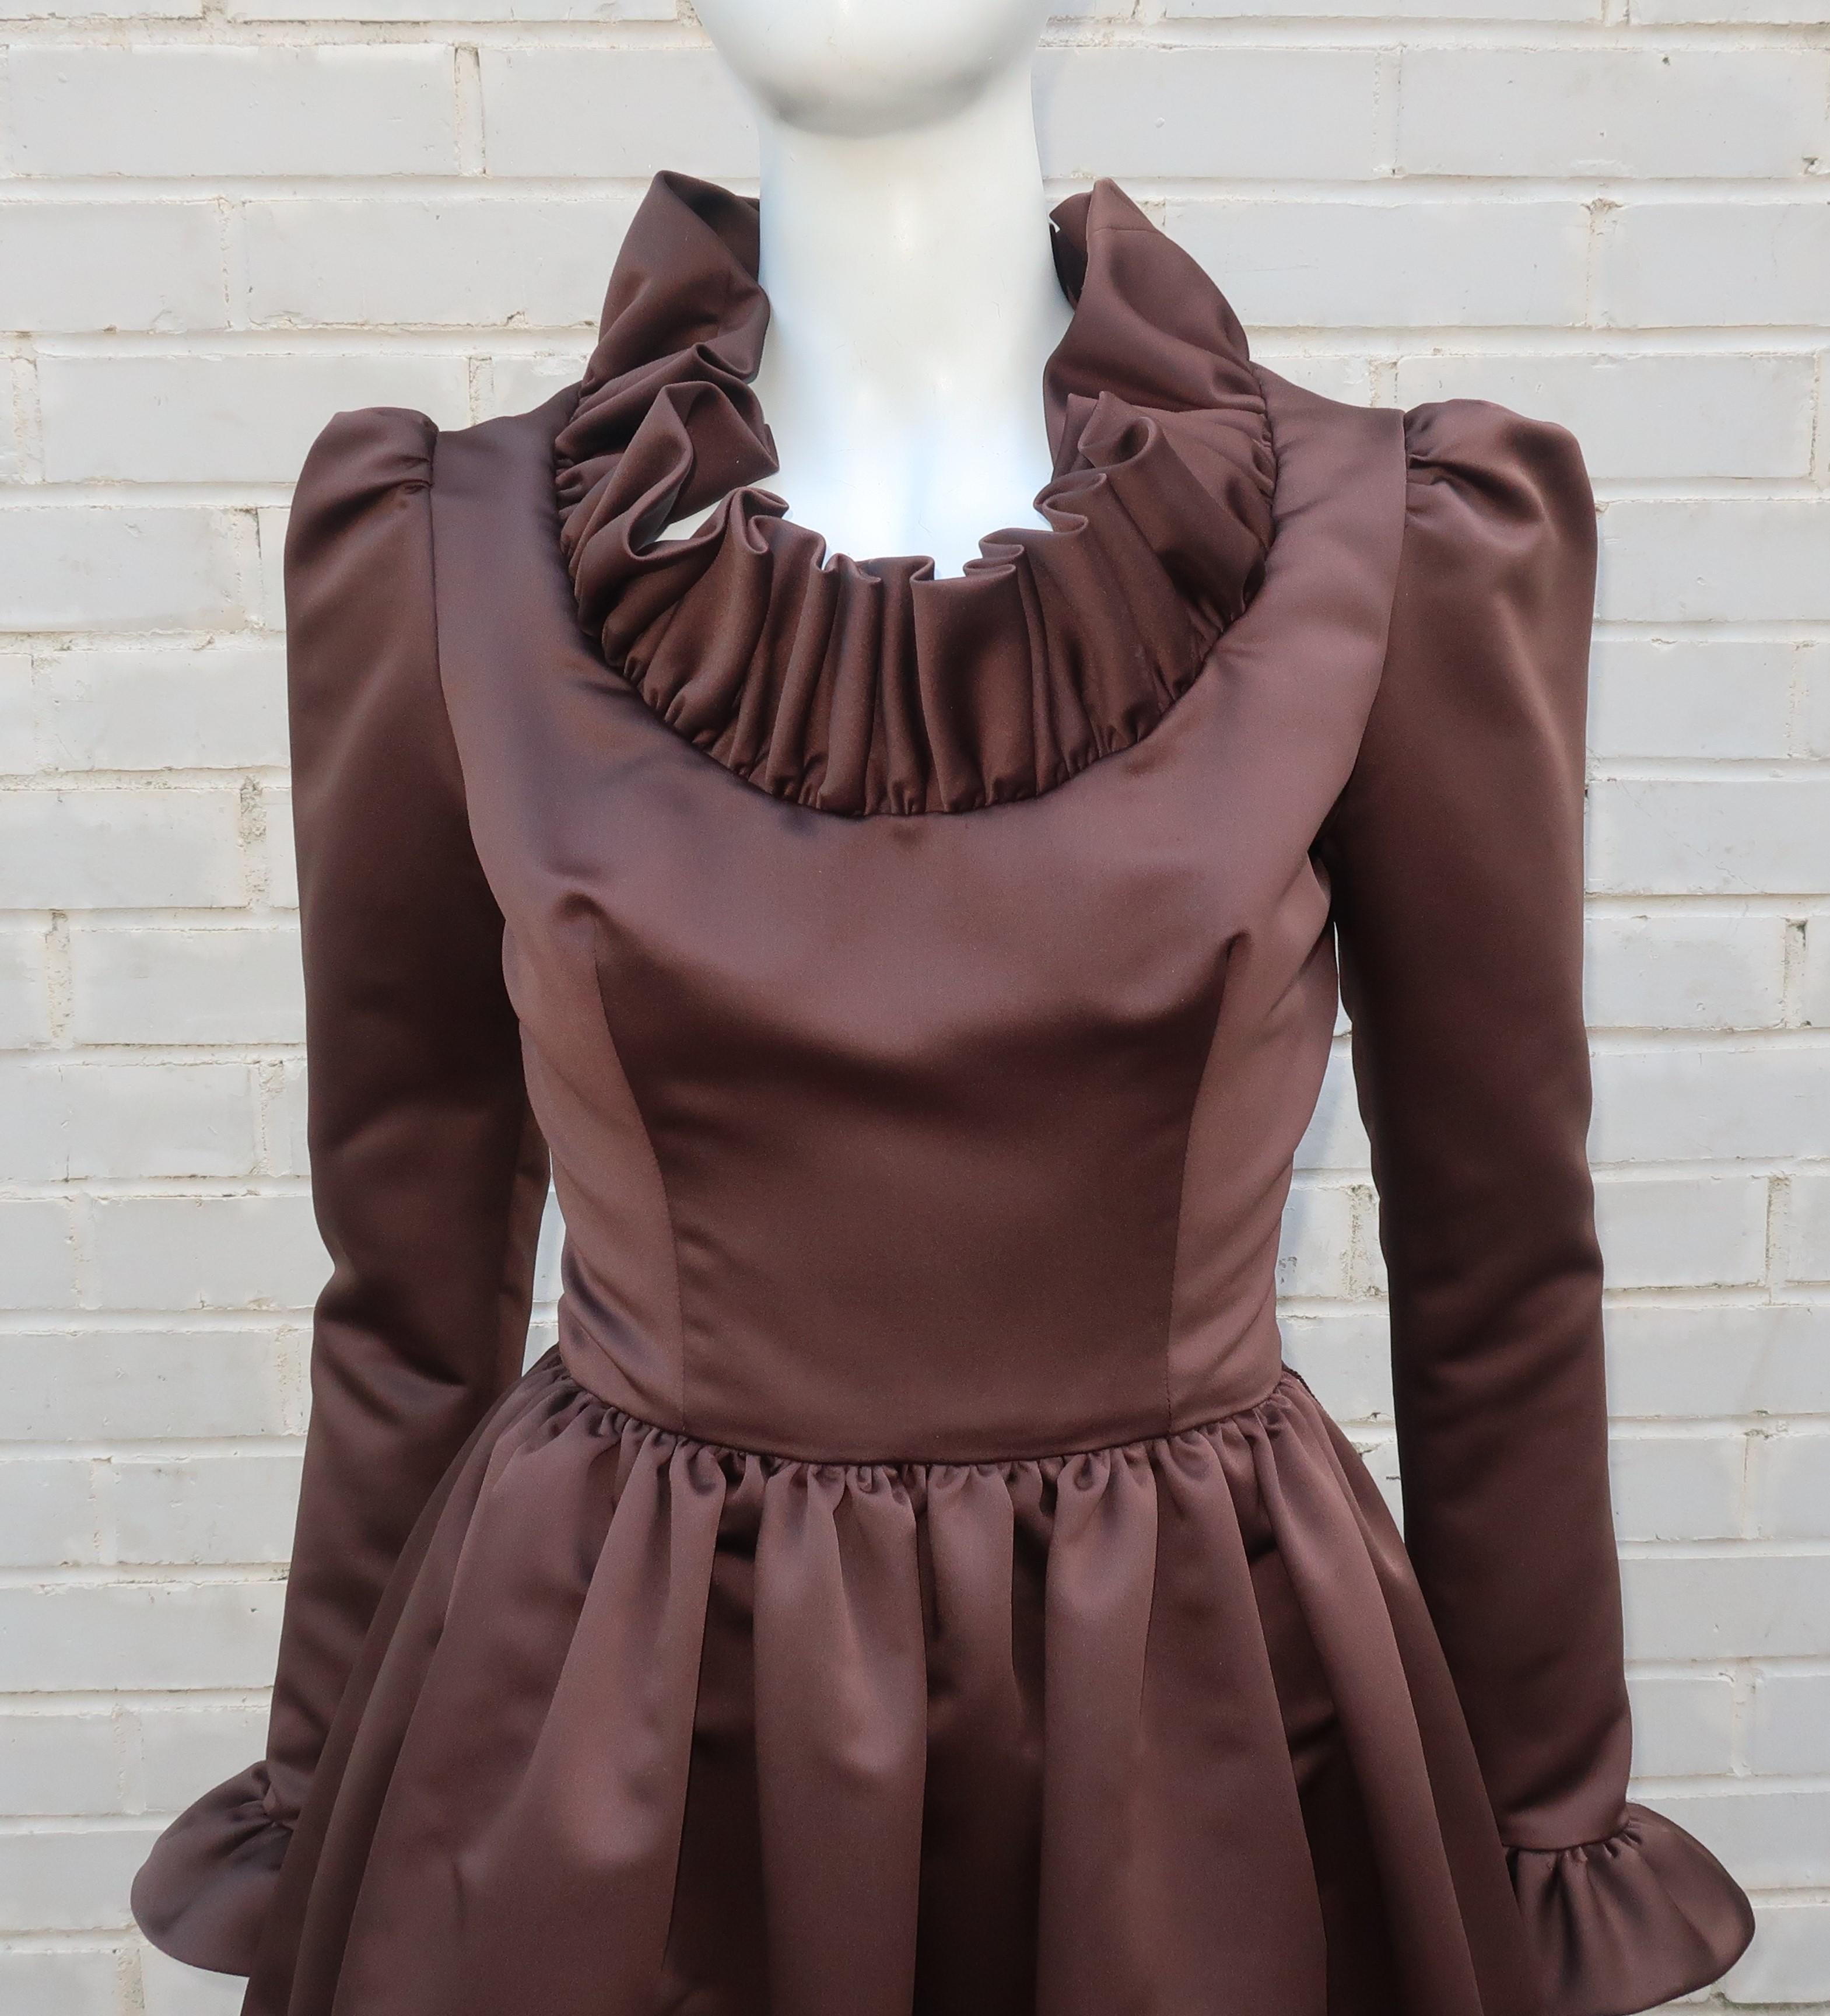 Jill Richards, the California designer of this fabulous 1970's cocktail dress, had the well earned nickname of 'Ruffles Richards' with both a flair for drama and flattering silhouettes.  The dress is fabricated from a rich chocolate brown satin